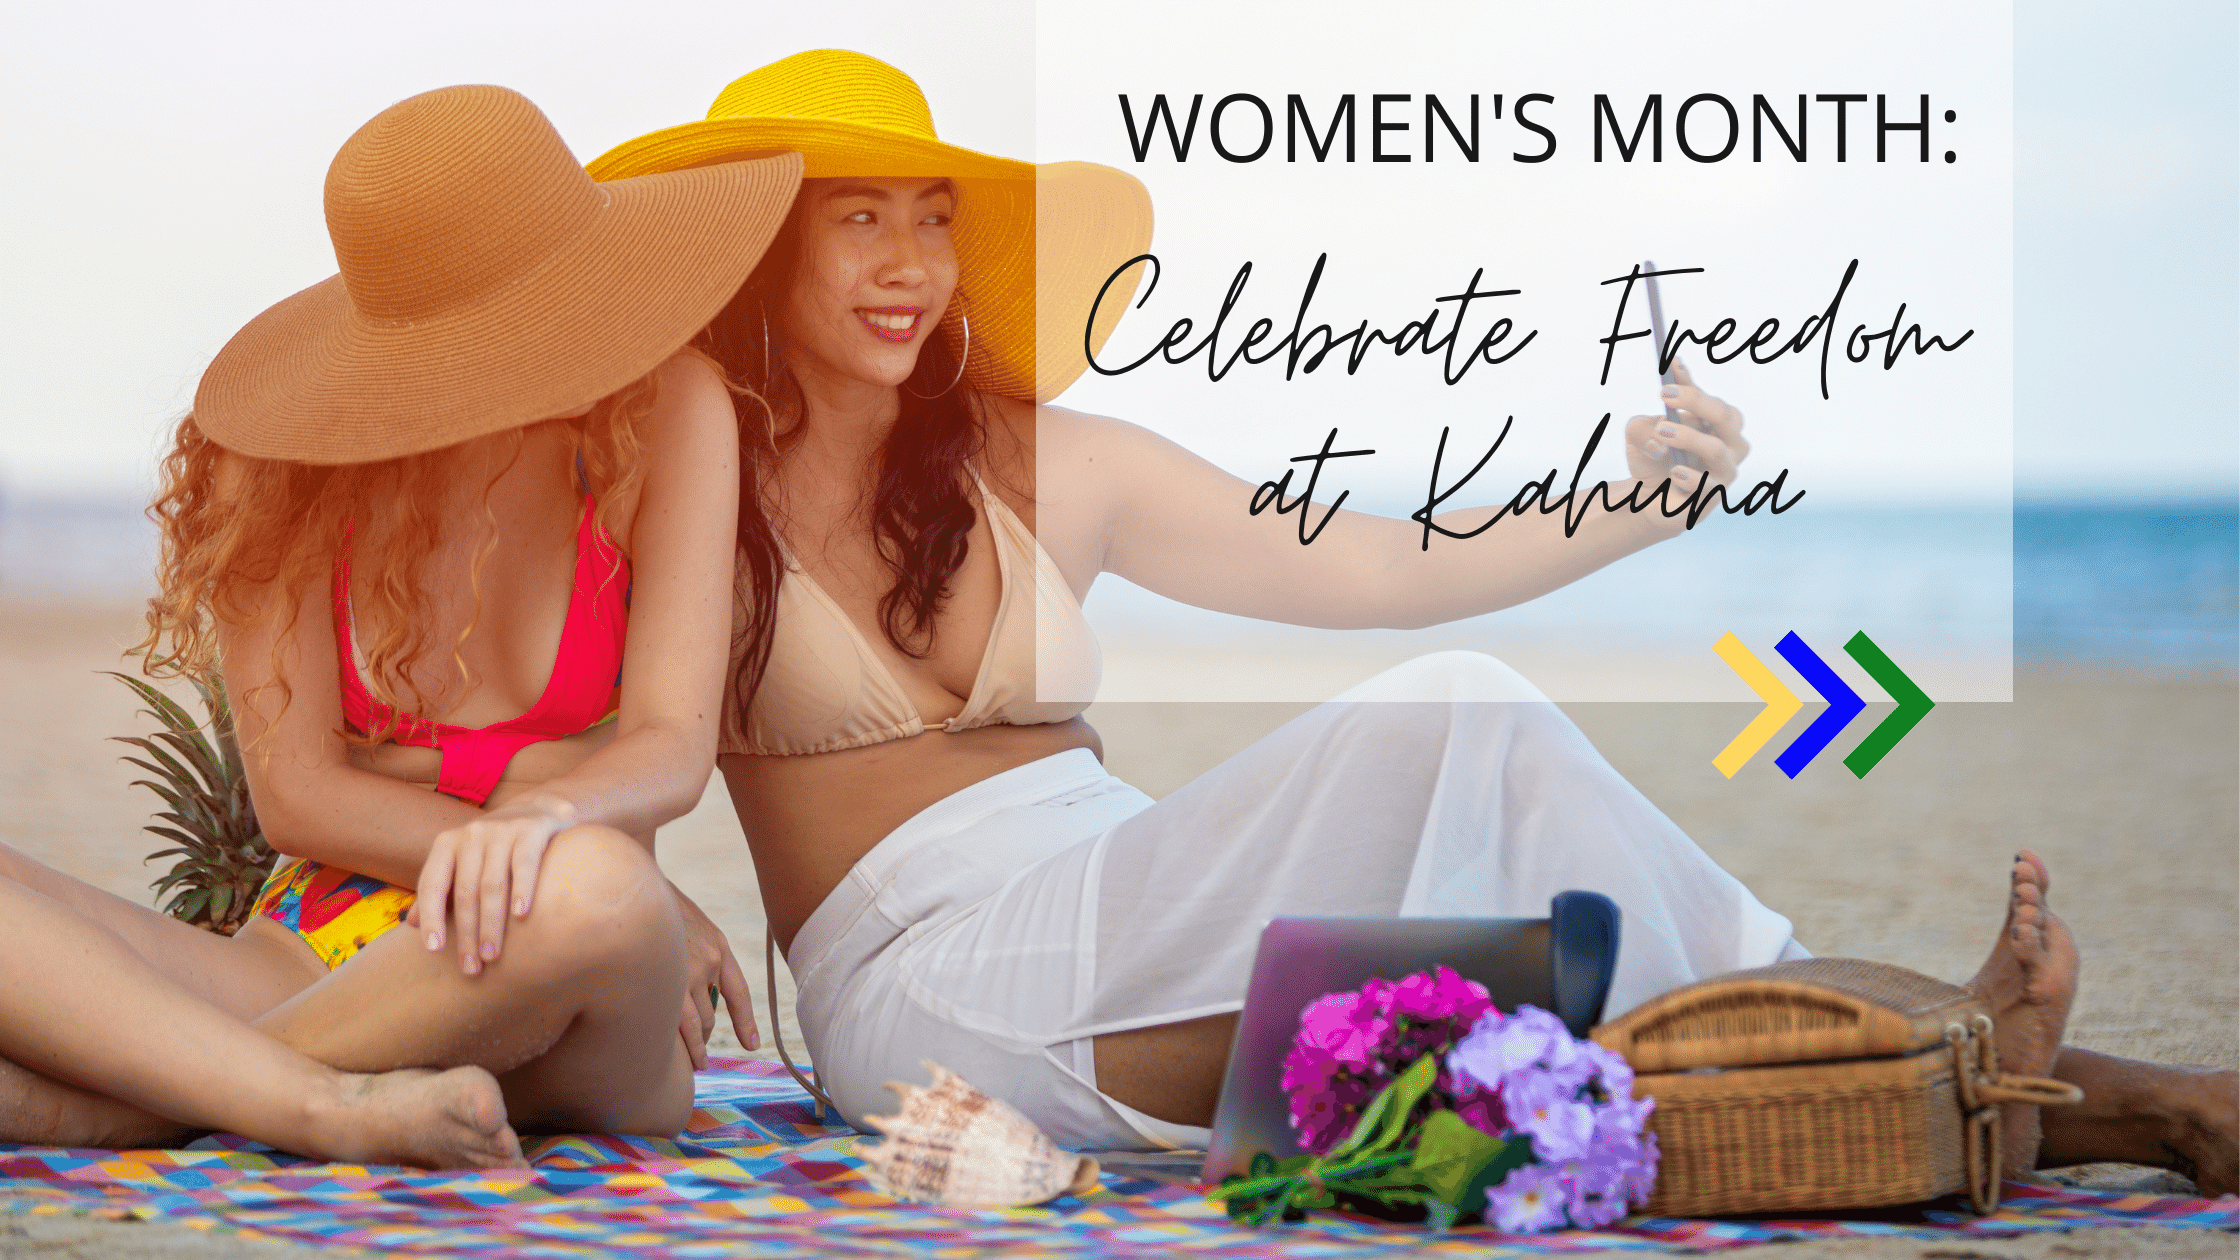 Womens month blog cover for kahuna resort